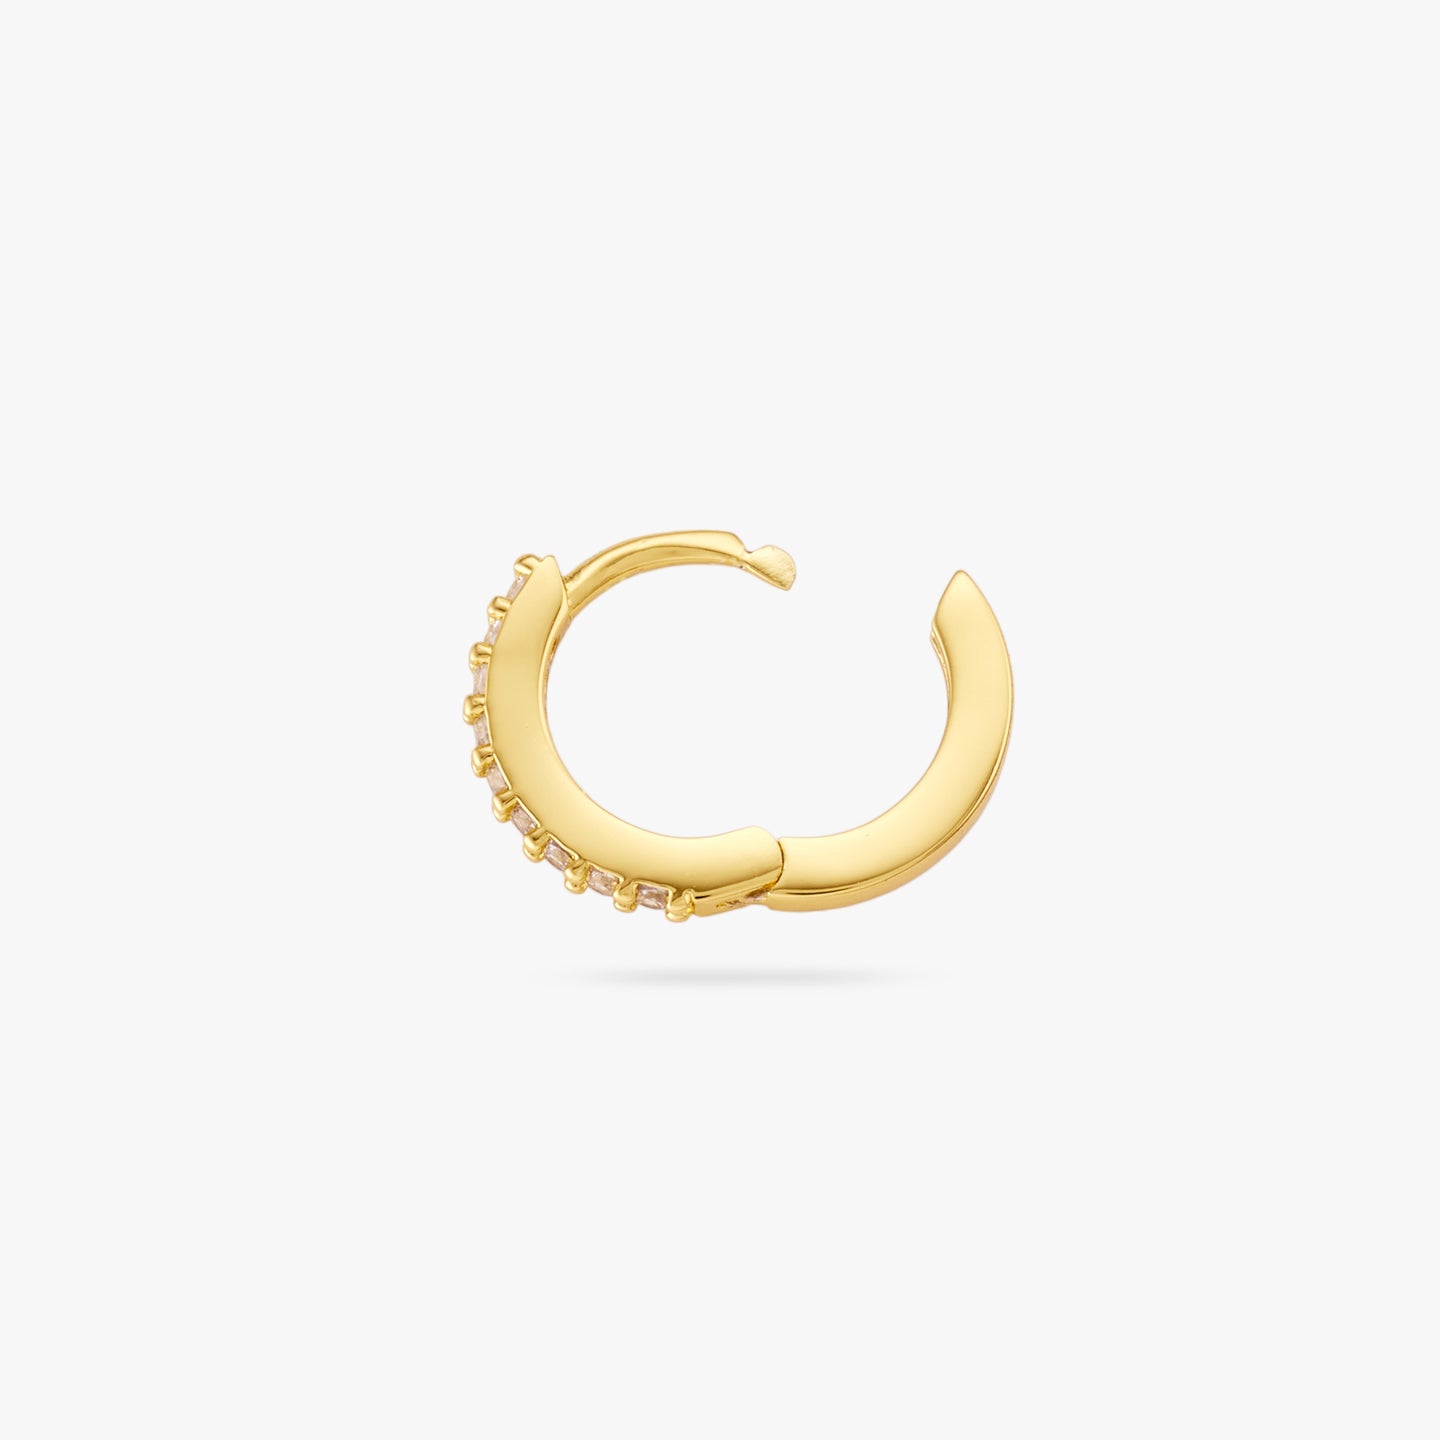 A mini gold huggie lined with clear cz gems on the front and its clasp undone color:null|gold/clear